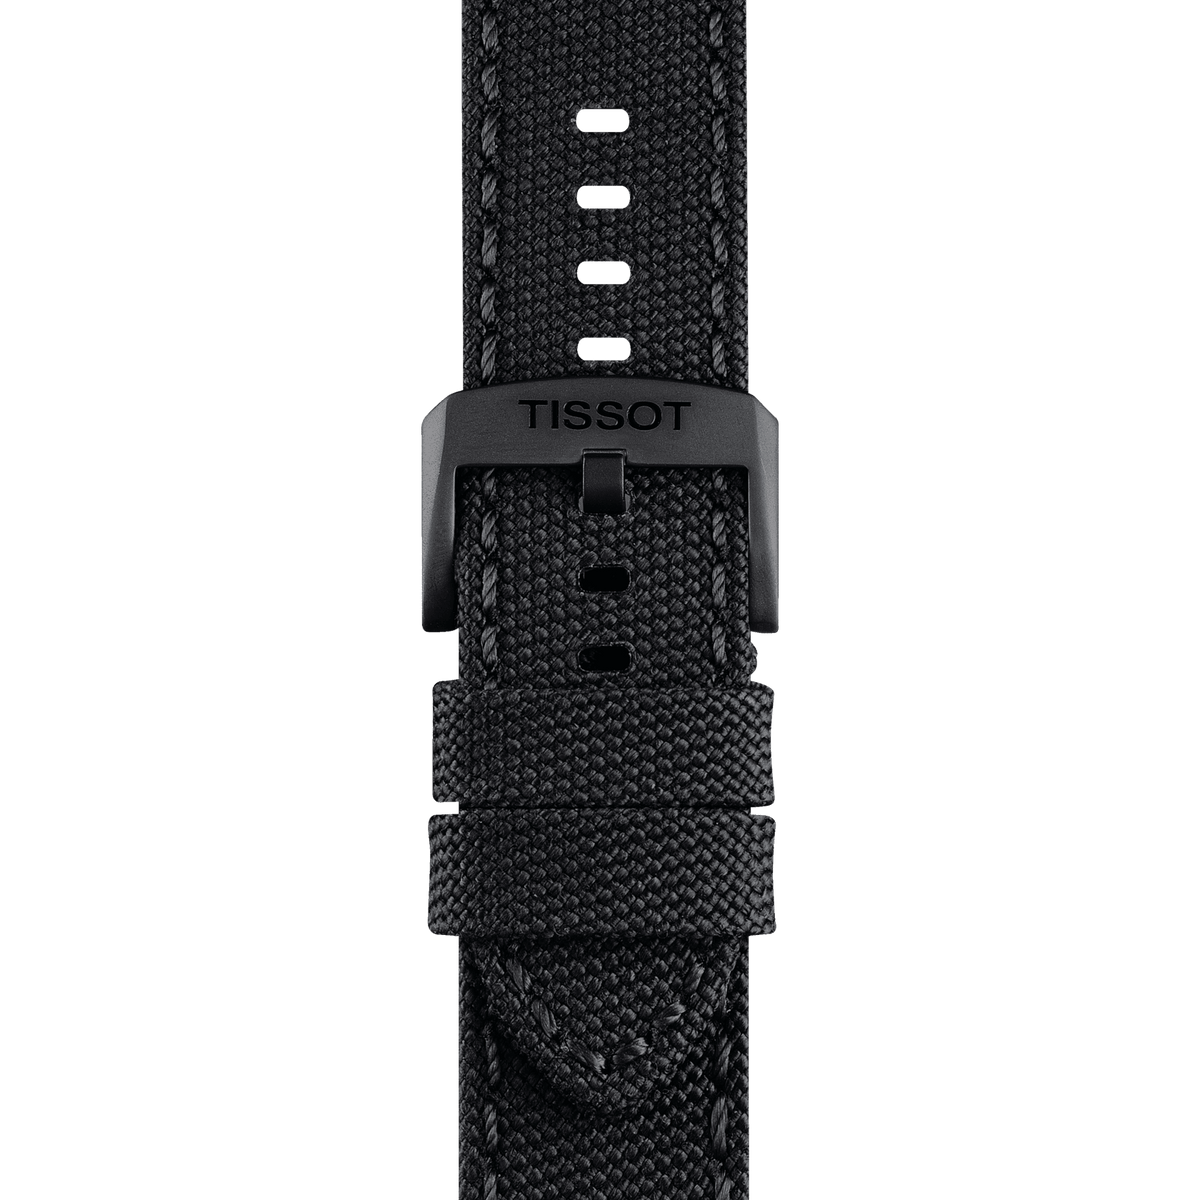 TISSOT OFFICIAL BLACK FABRIC STRAP LUGS 22 MM